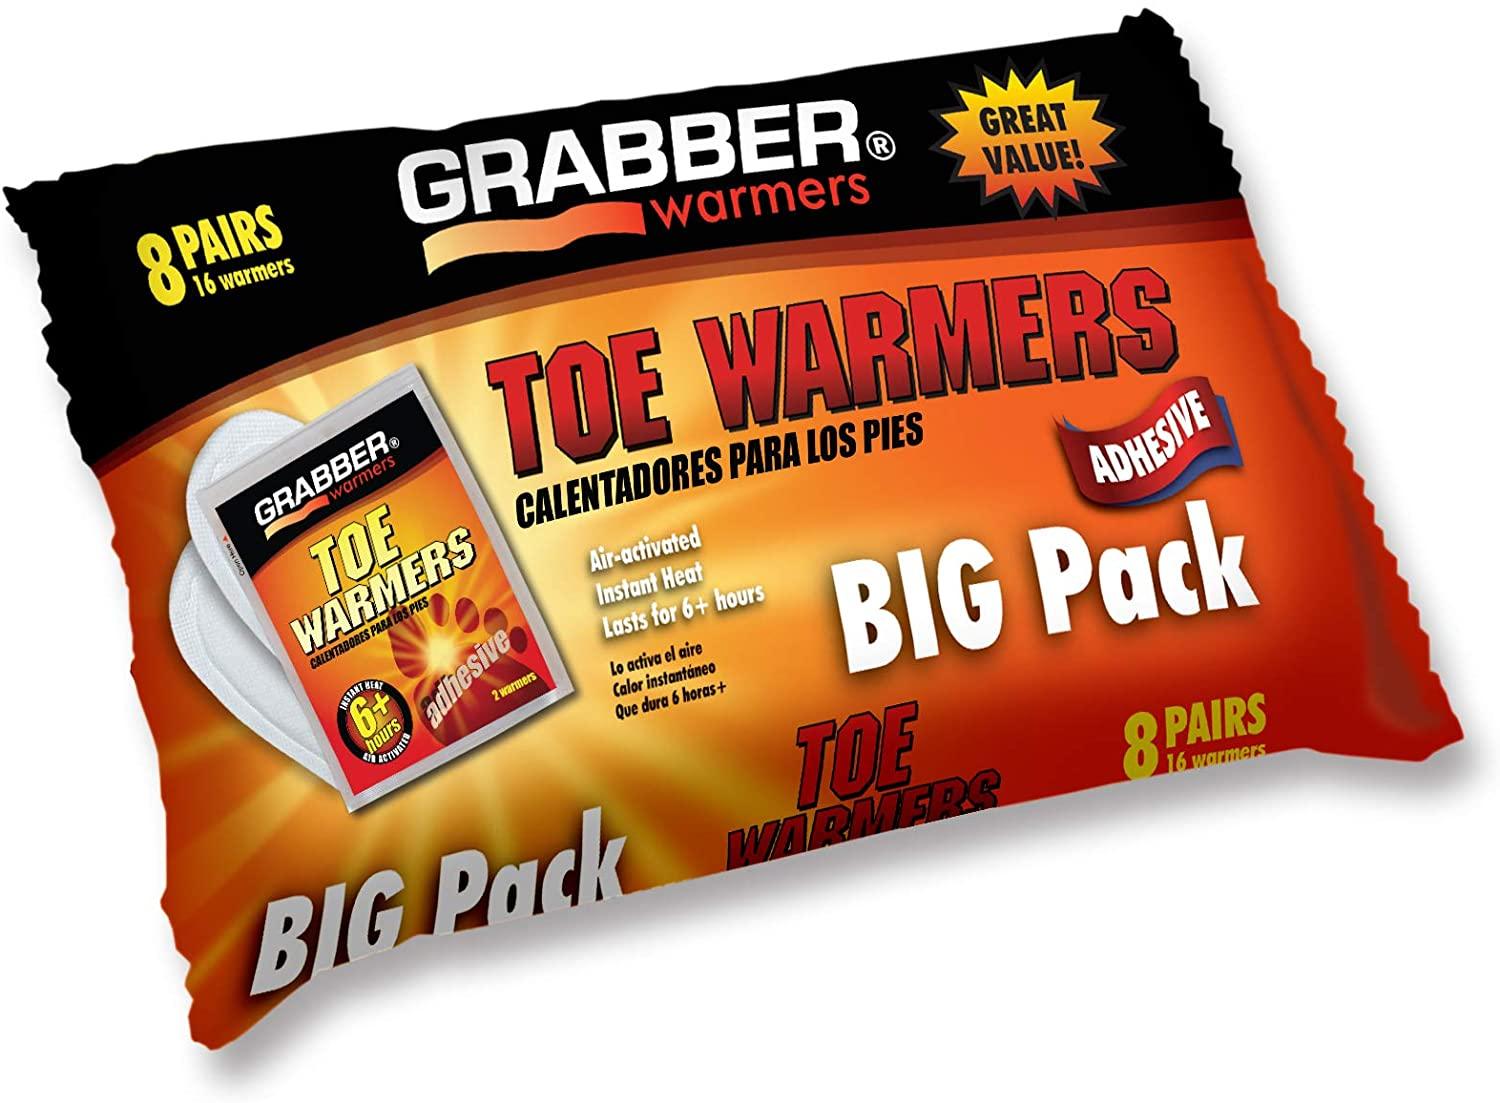 8-Pairs of Grabber Toe Warmers for $4.93